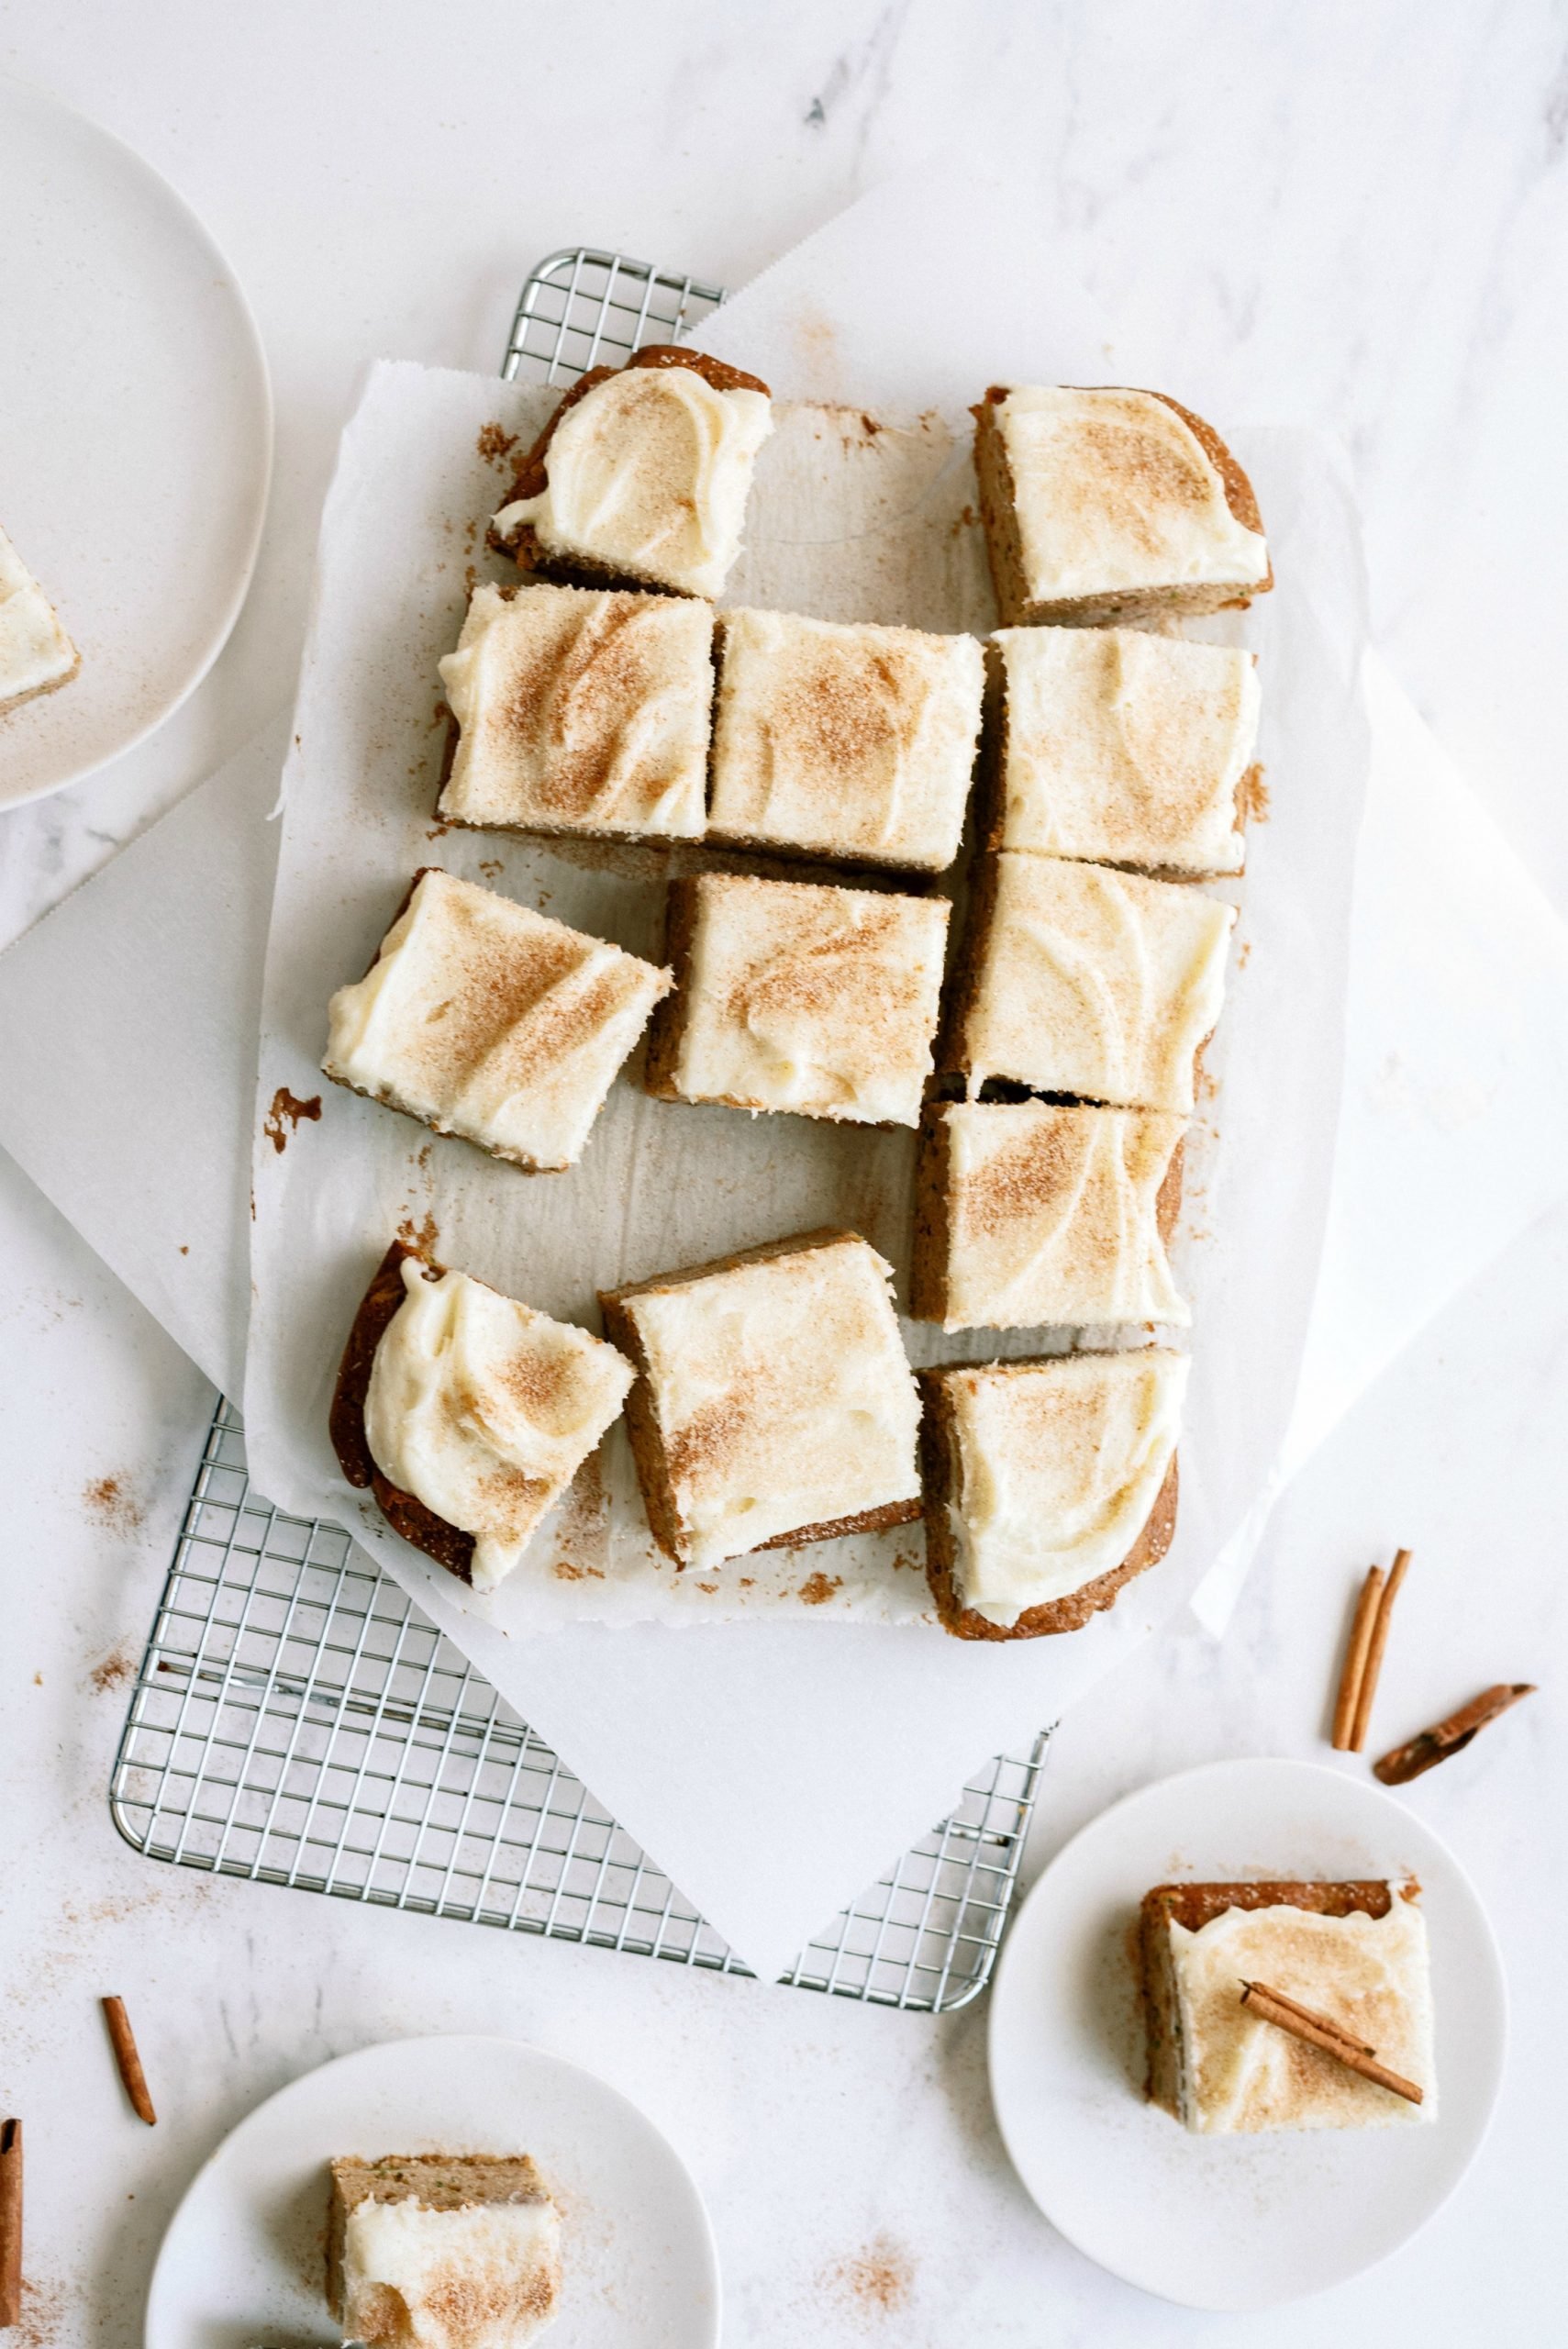 Cinnamon Zucchini Cake with Cream Cheese Frosting sliced into squares
